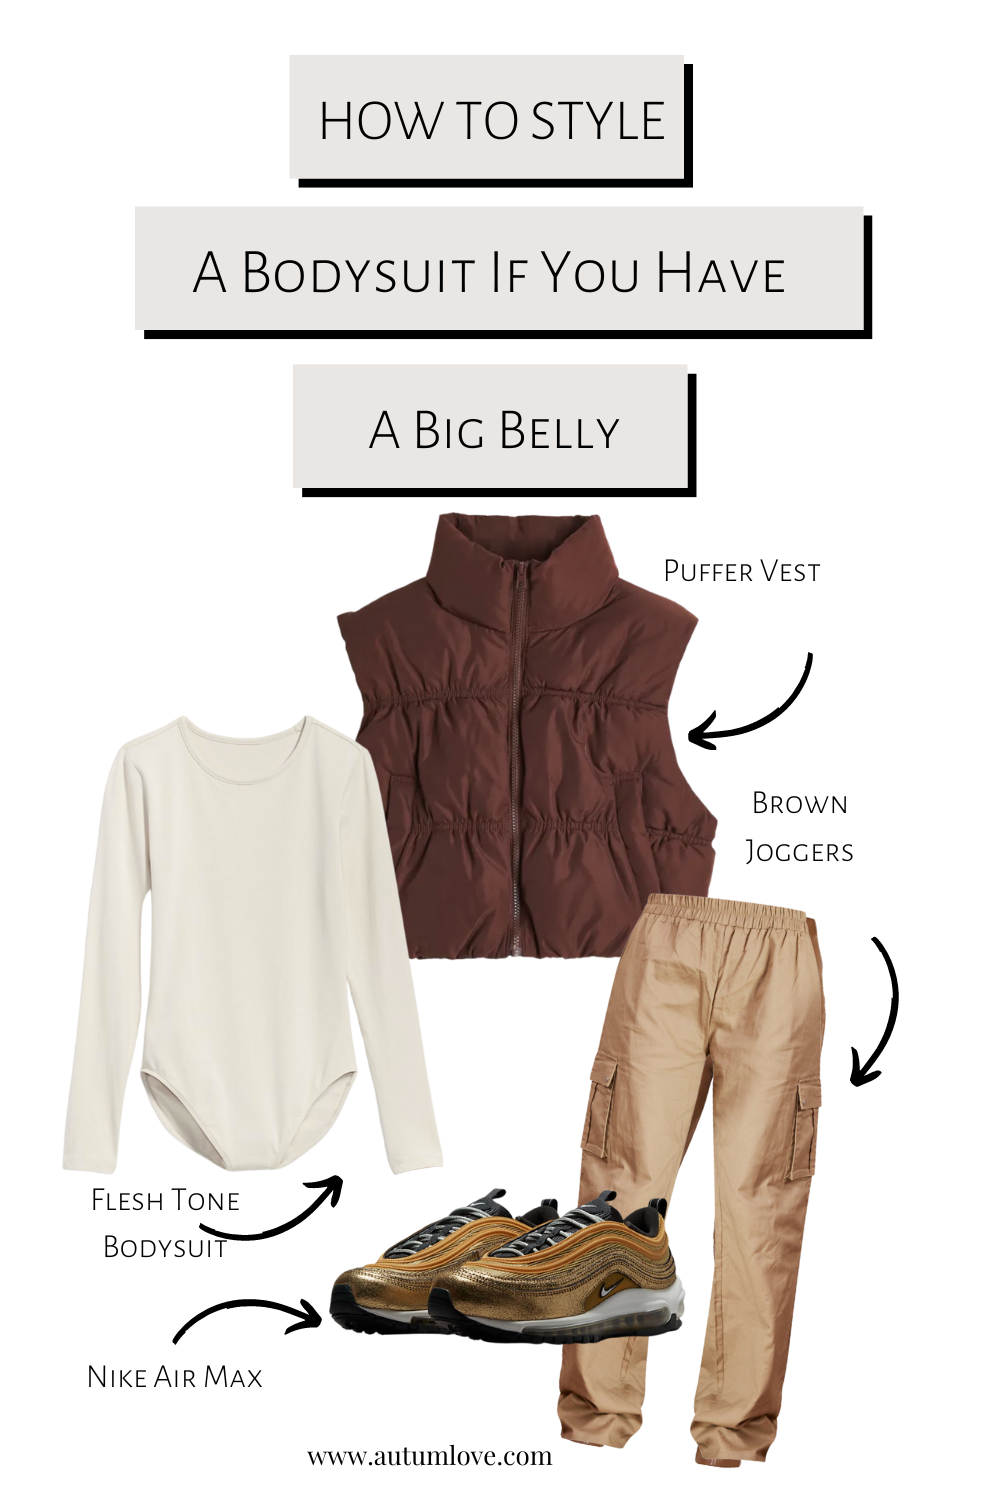 How To Wear A Bodysuit If You Have a Big Belly — Autum Love